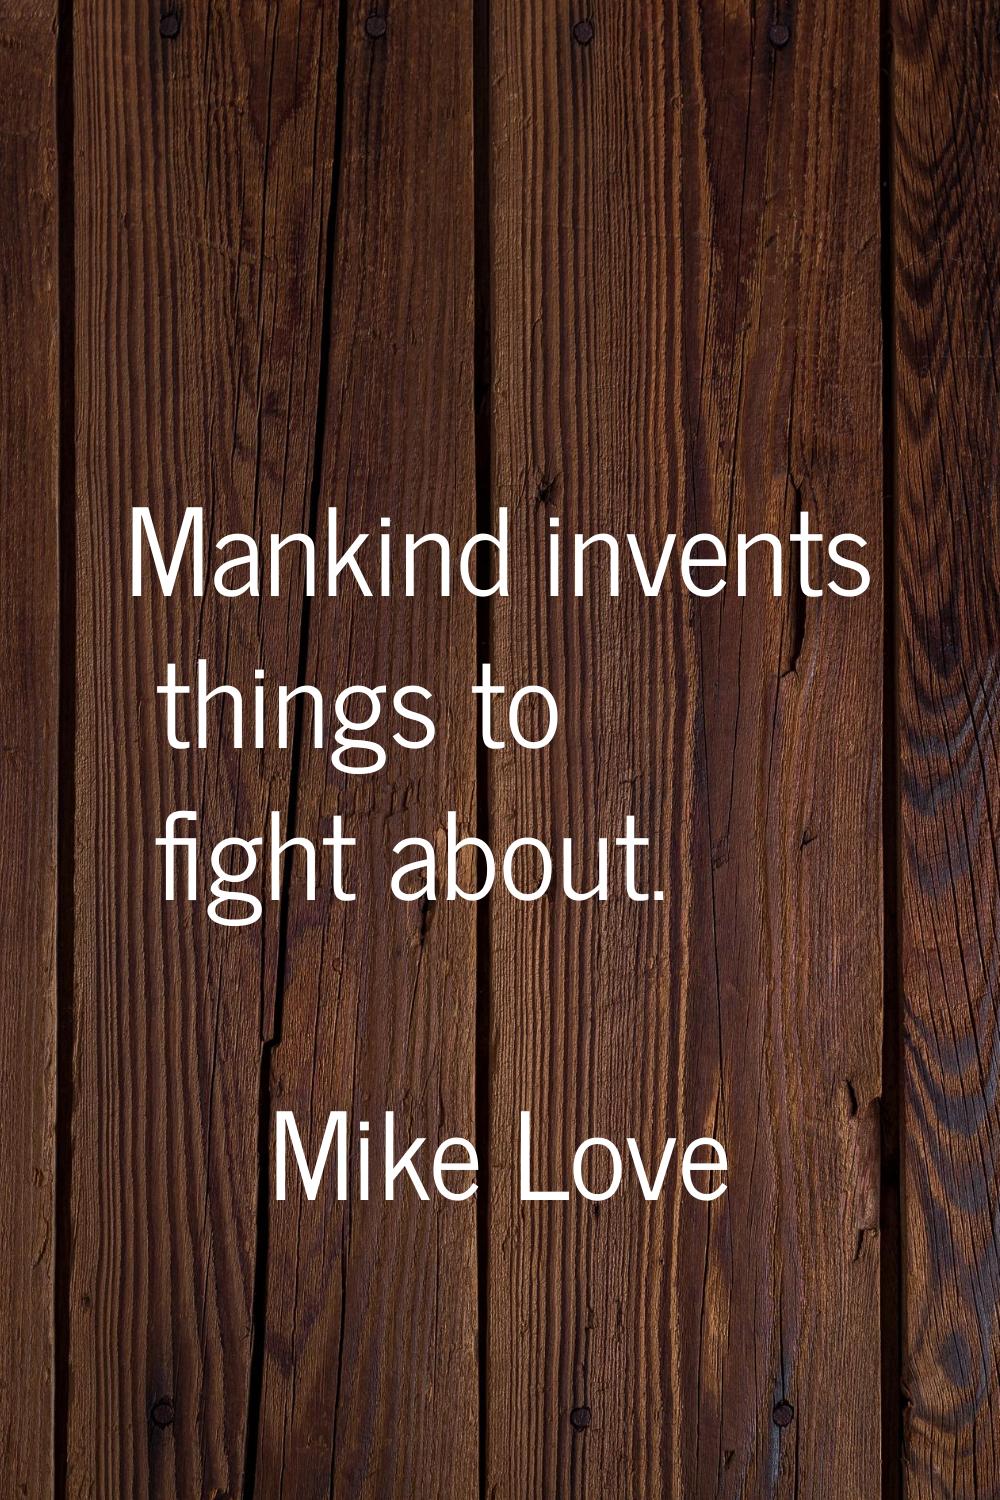 Mankind invents things to fight about.